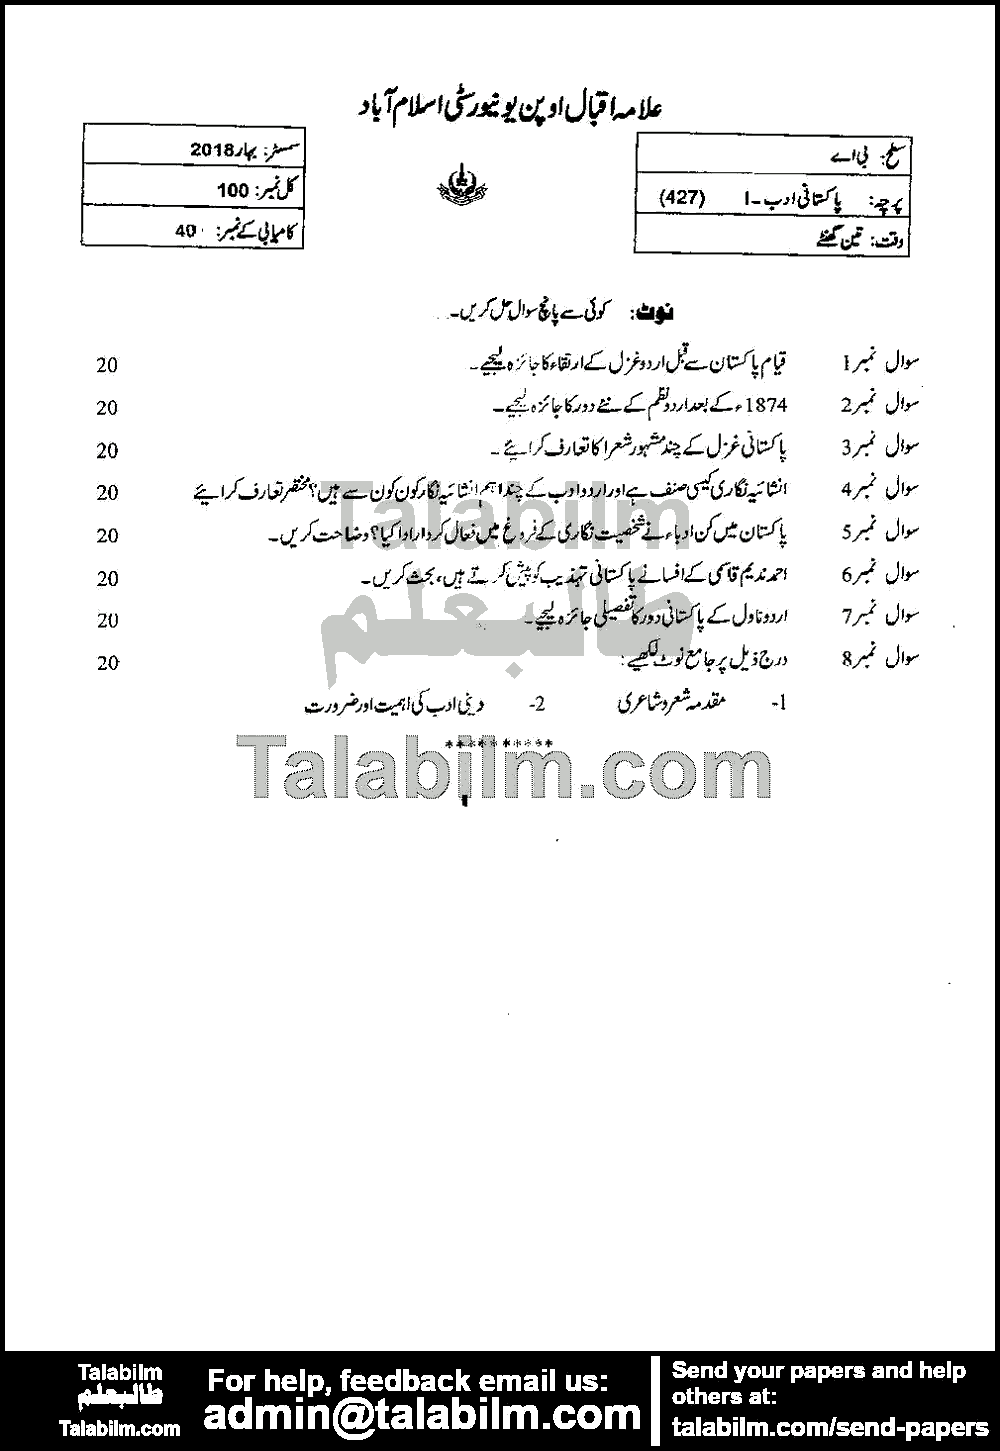 Pakistani Adab-I 427 past paper for Spring 2018